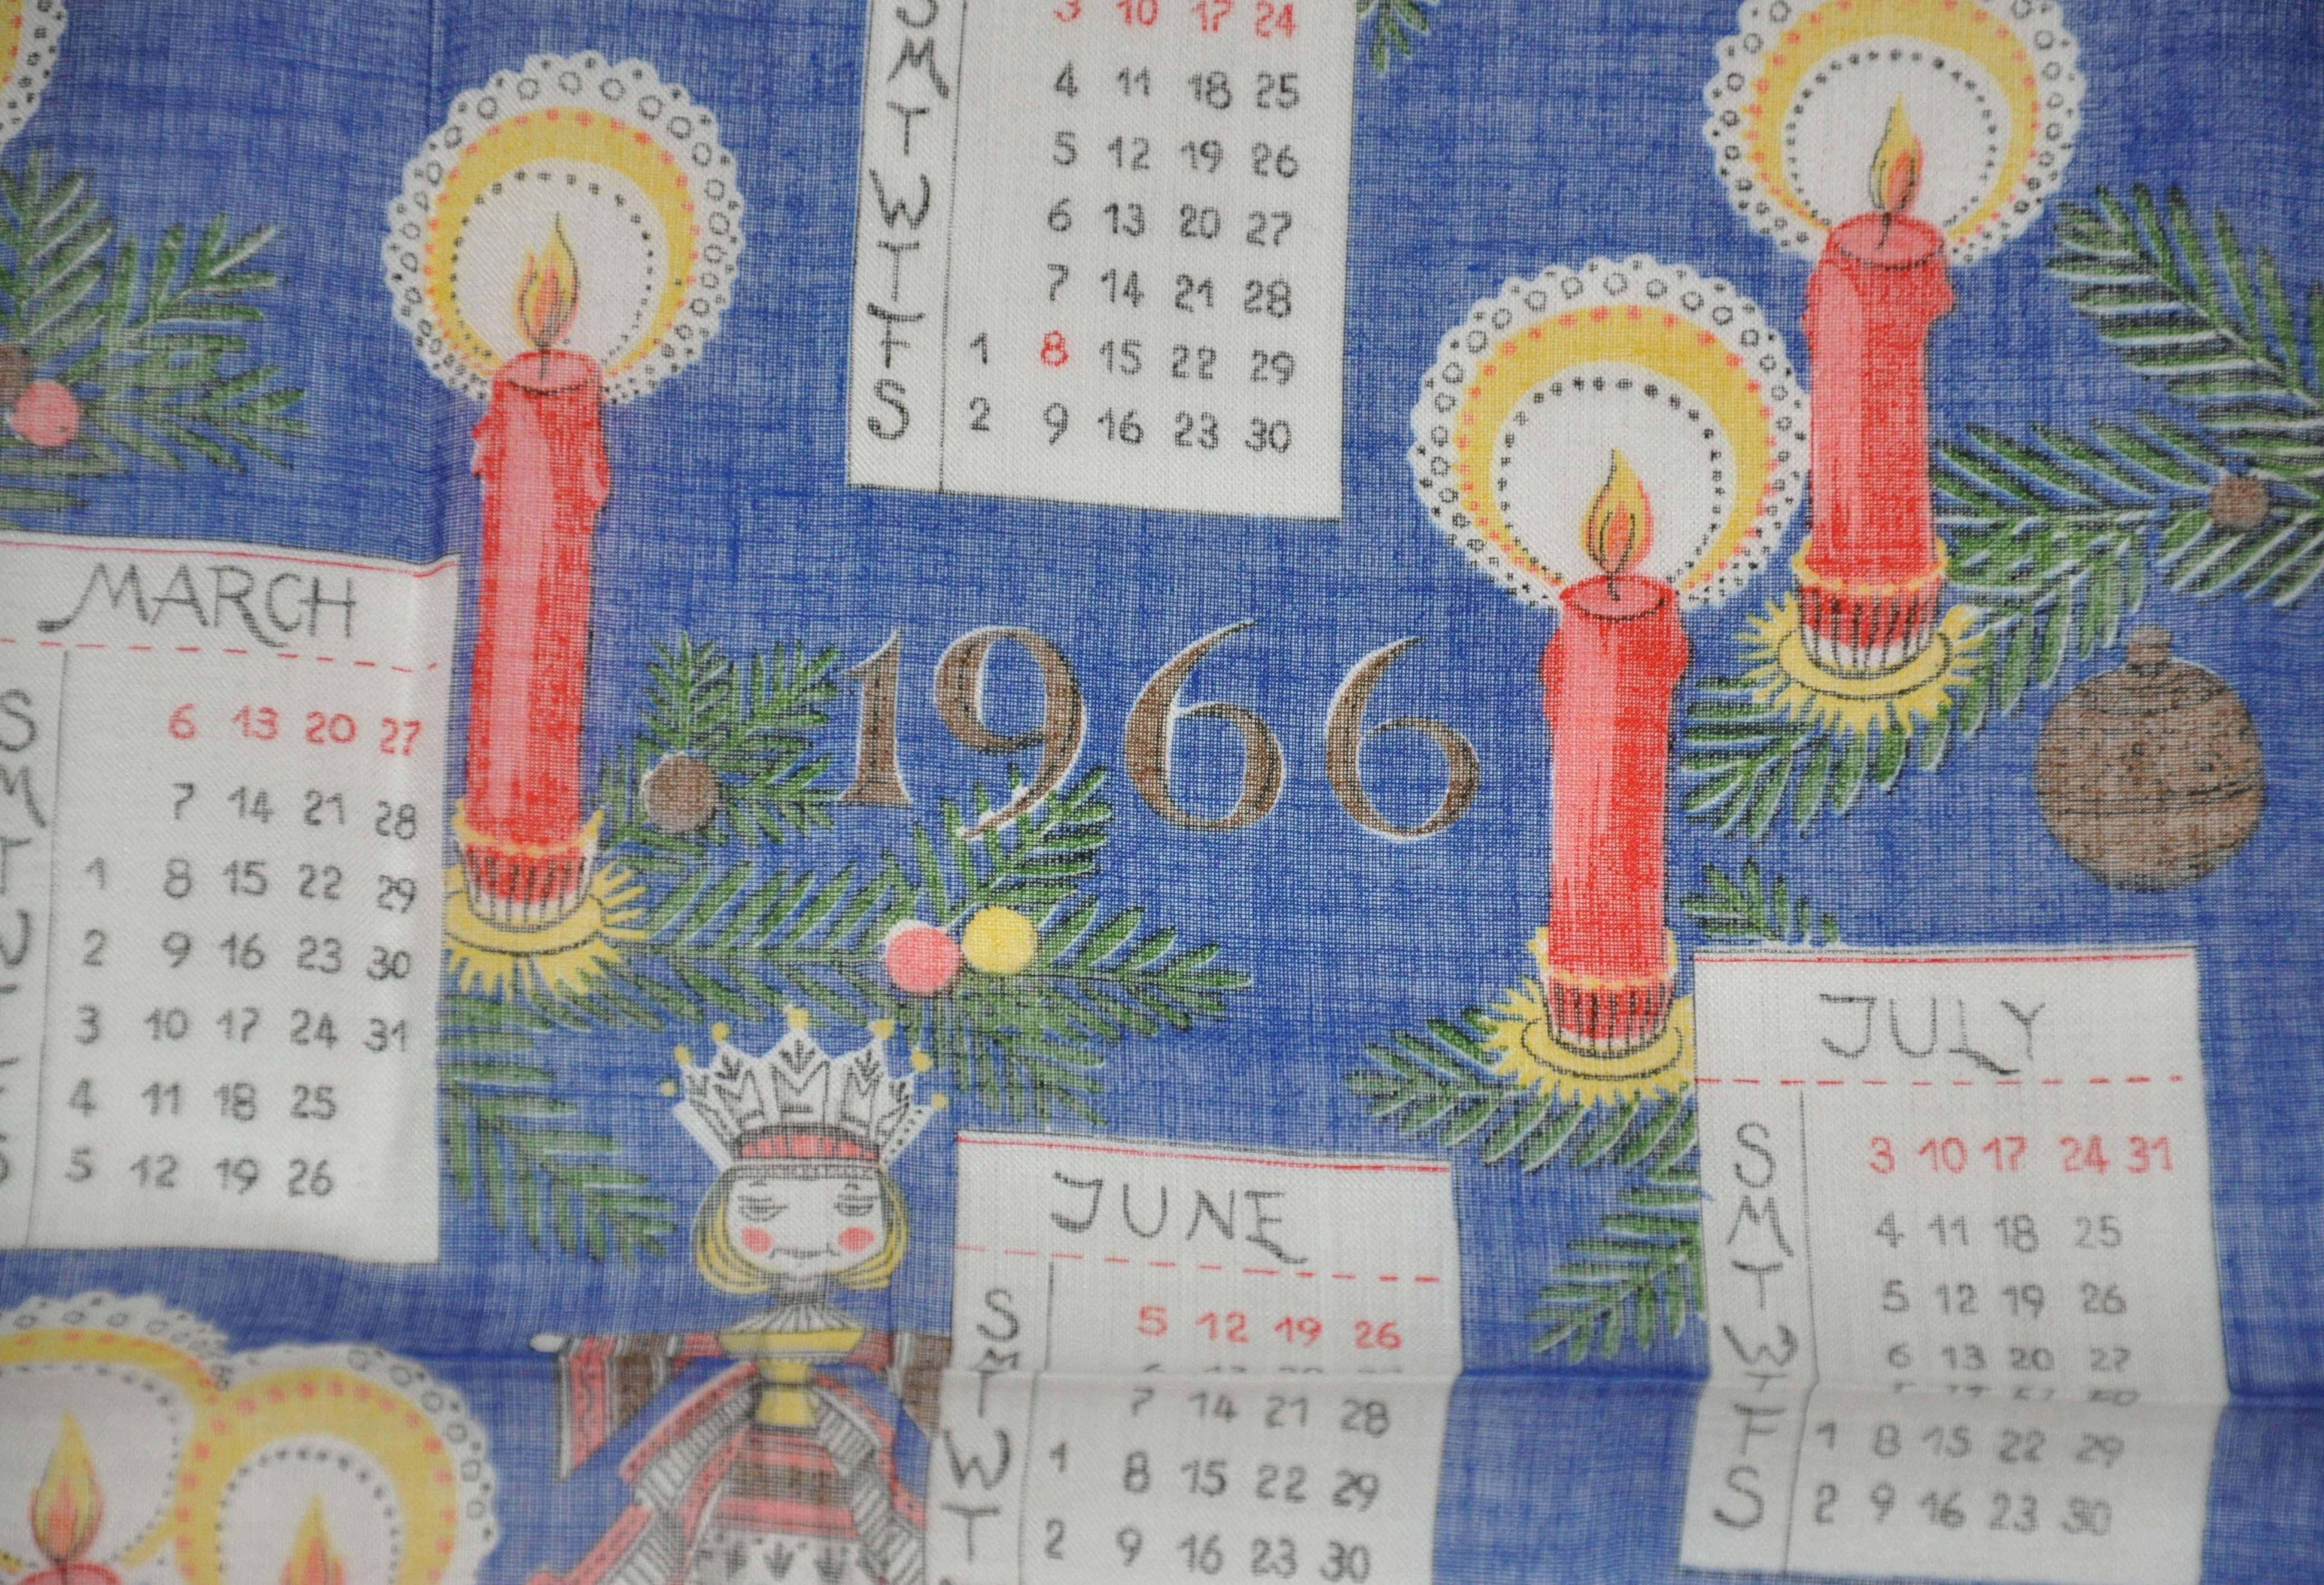 "1966" calendar cotton handkerchief measures 12" x 12", finished with white hand-rolled edges. Made in USA.